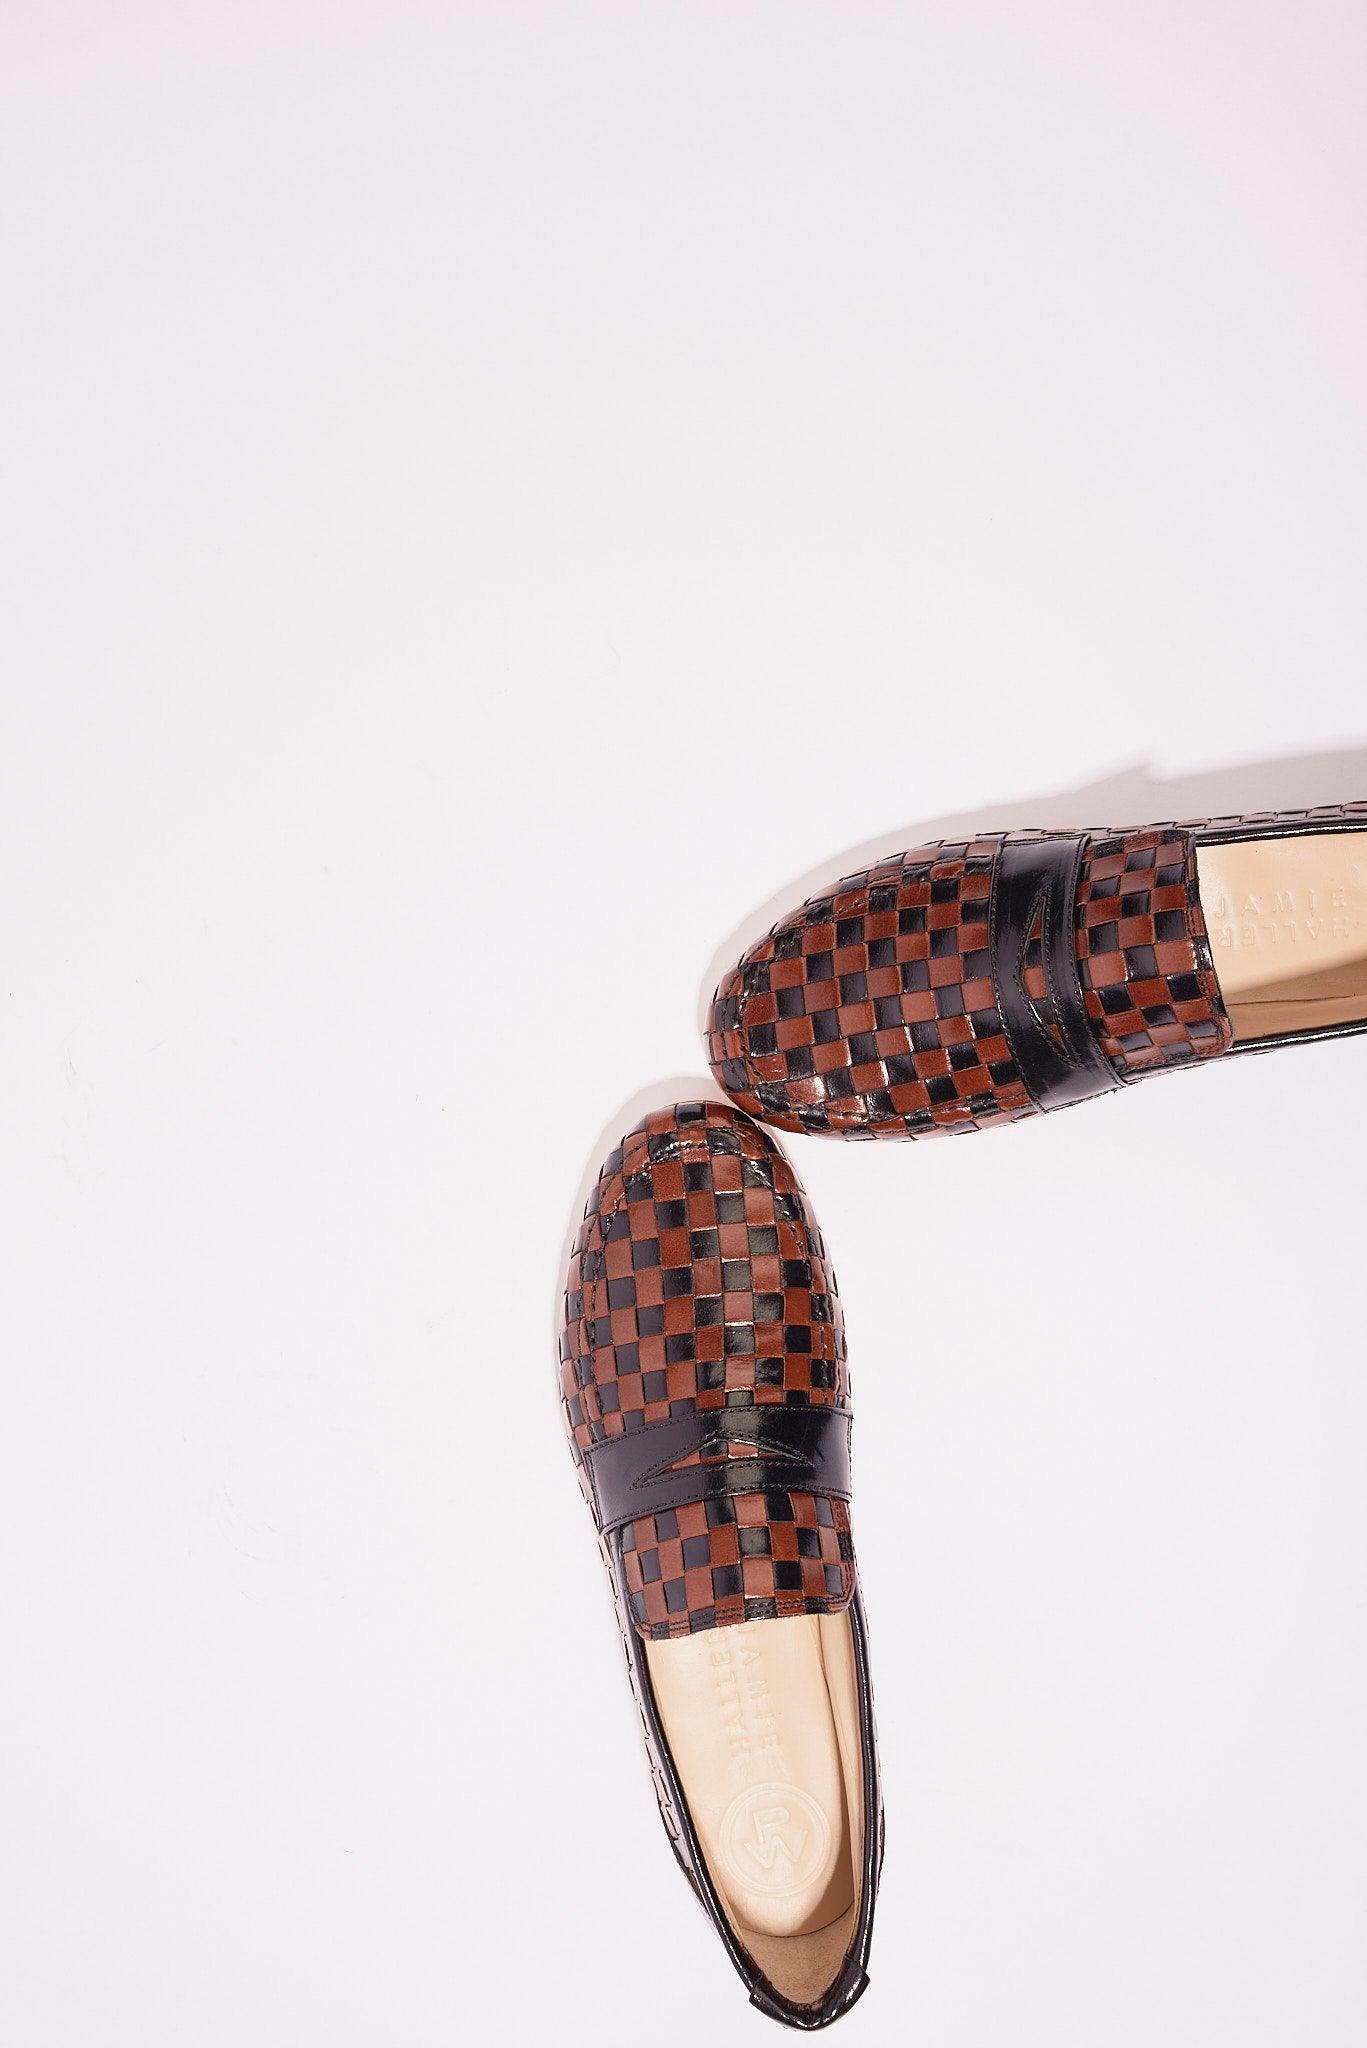 Black and Brown Woven Loafer Flat View on Angle 3